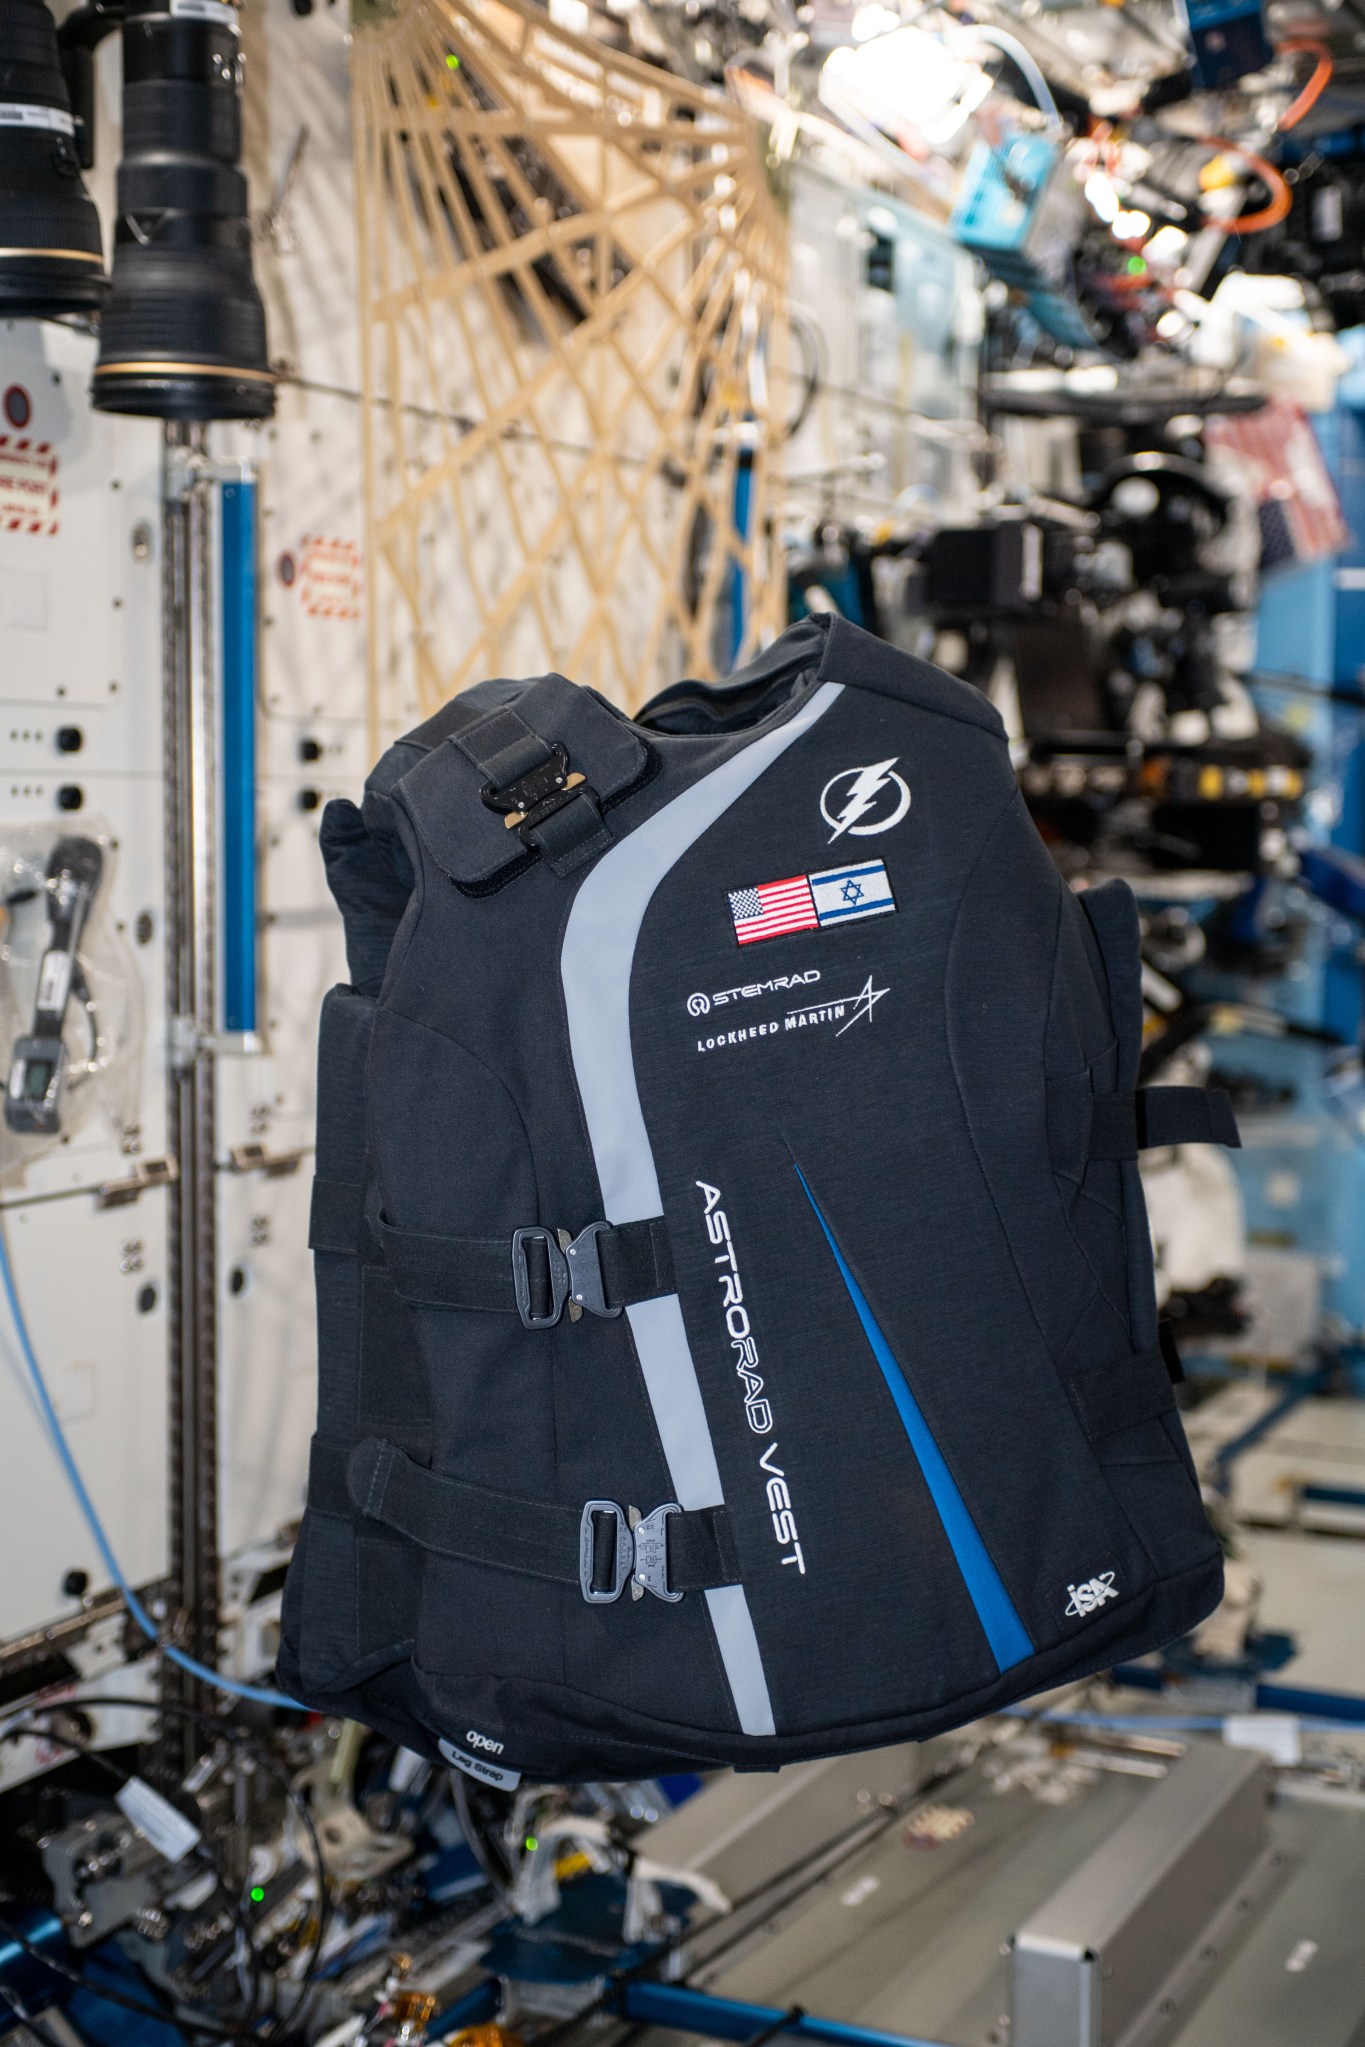 The AstroRad vest floating inside the space station